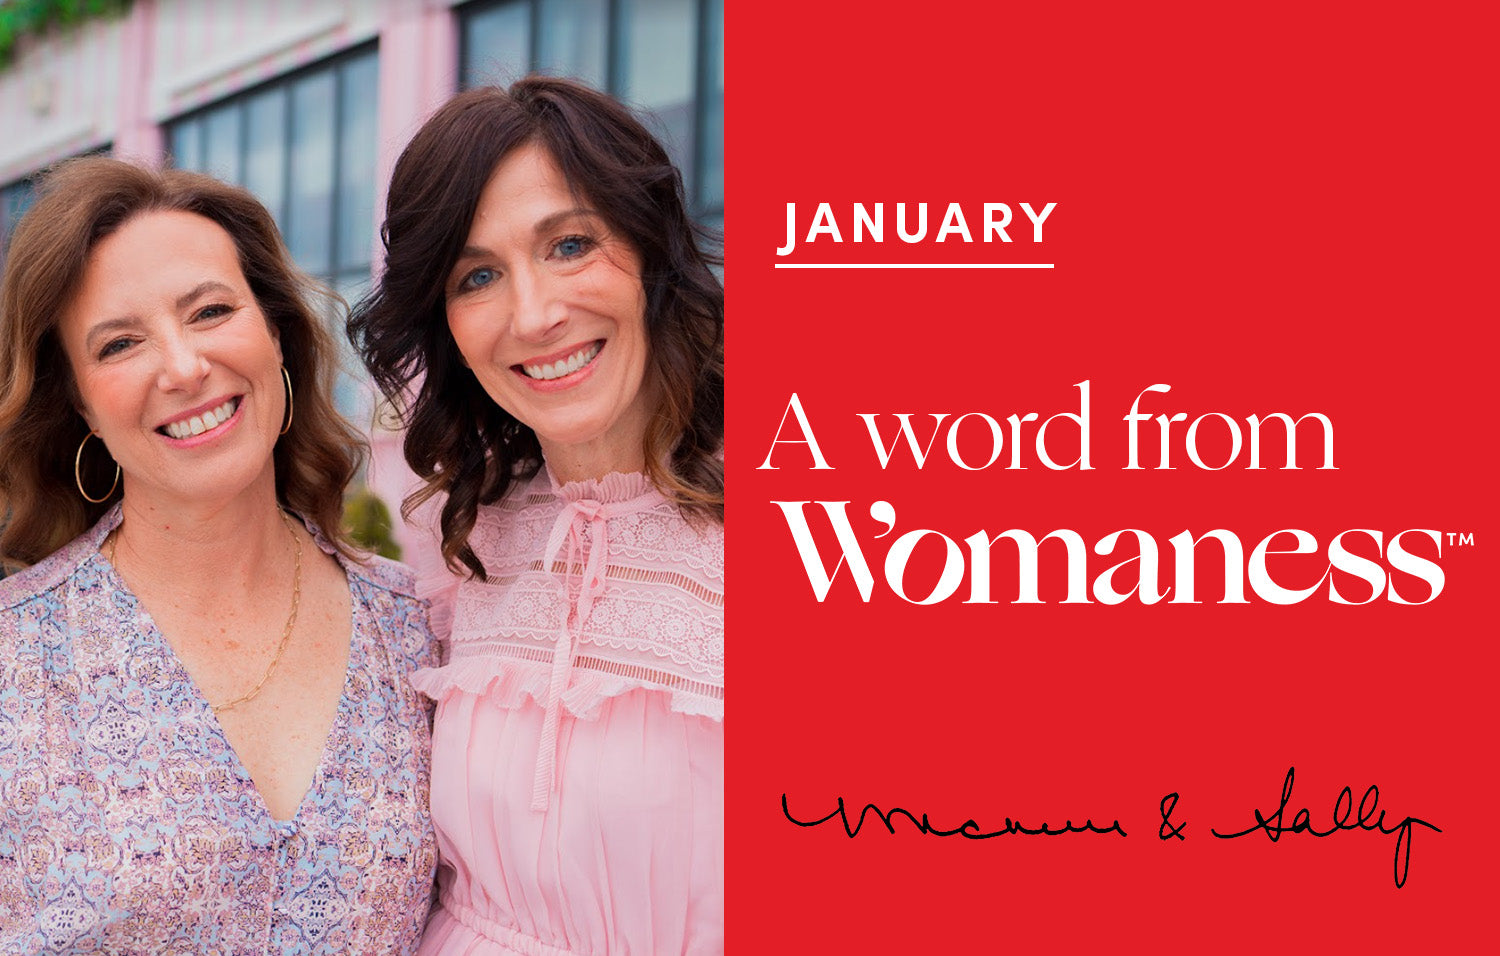 Michelle Jacobs & Sally Mueller of menopause brand Womaness